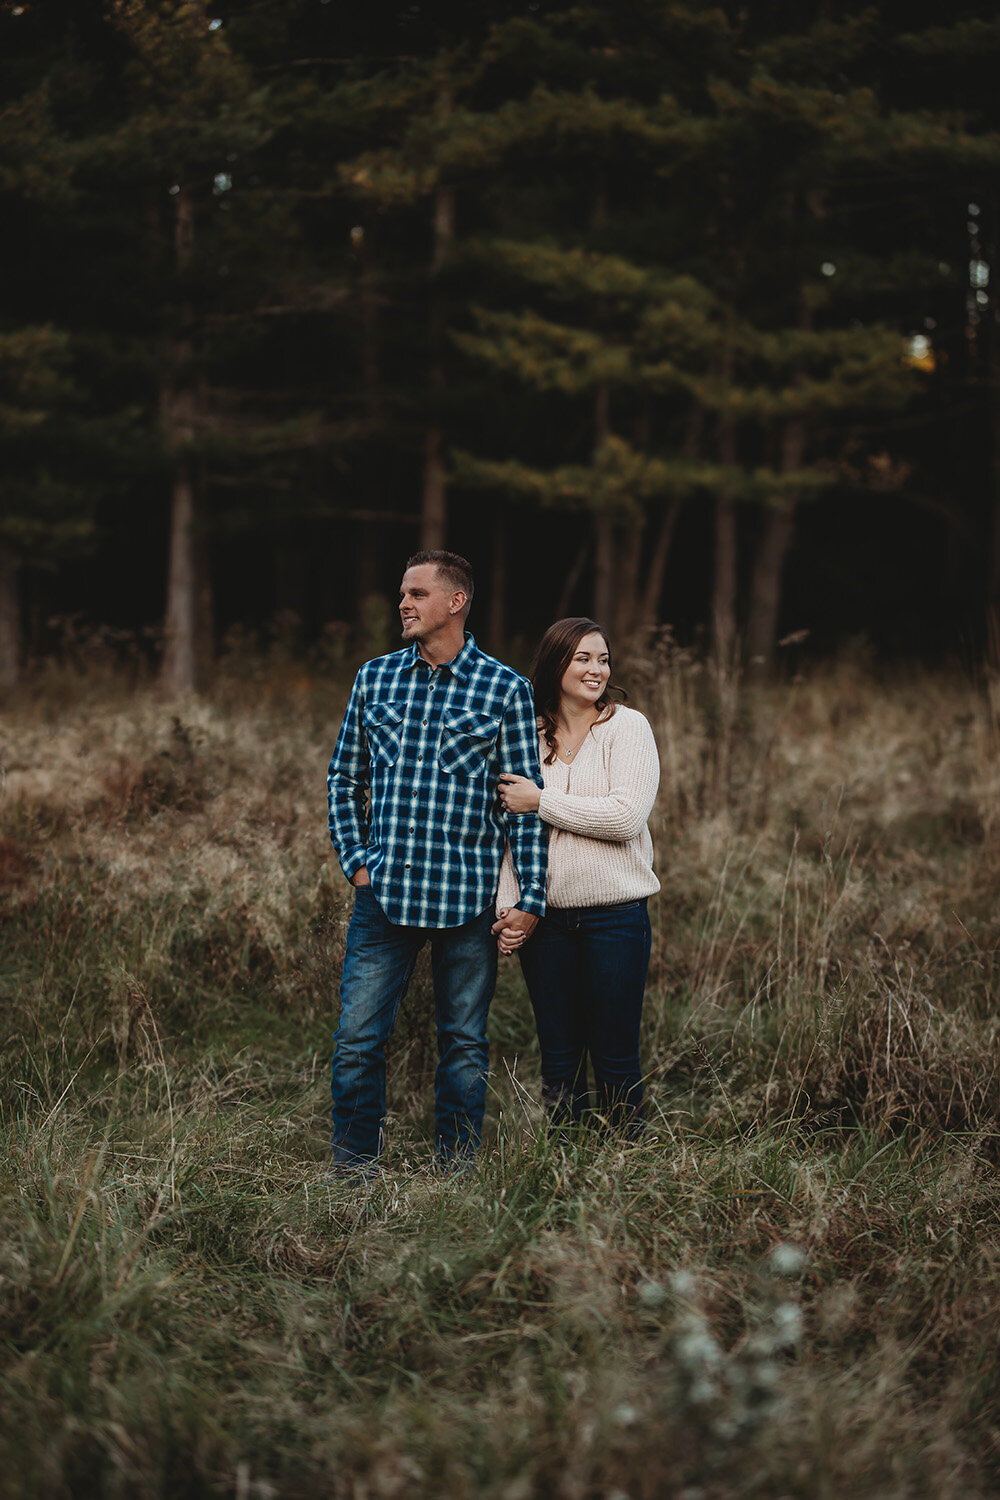 nelsons-ledges-quarry-park-engagement-photos-by-oh-deer-photography (20).jpg